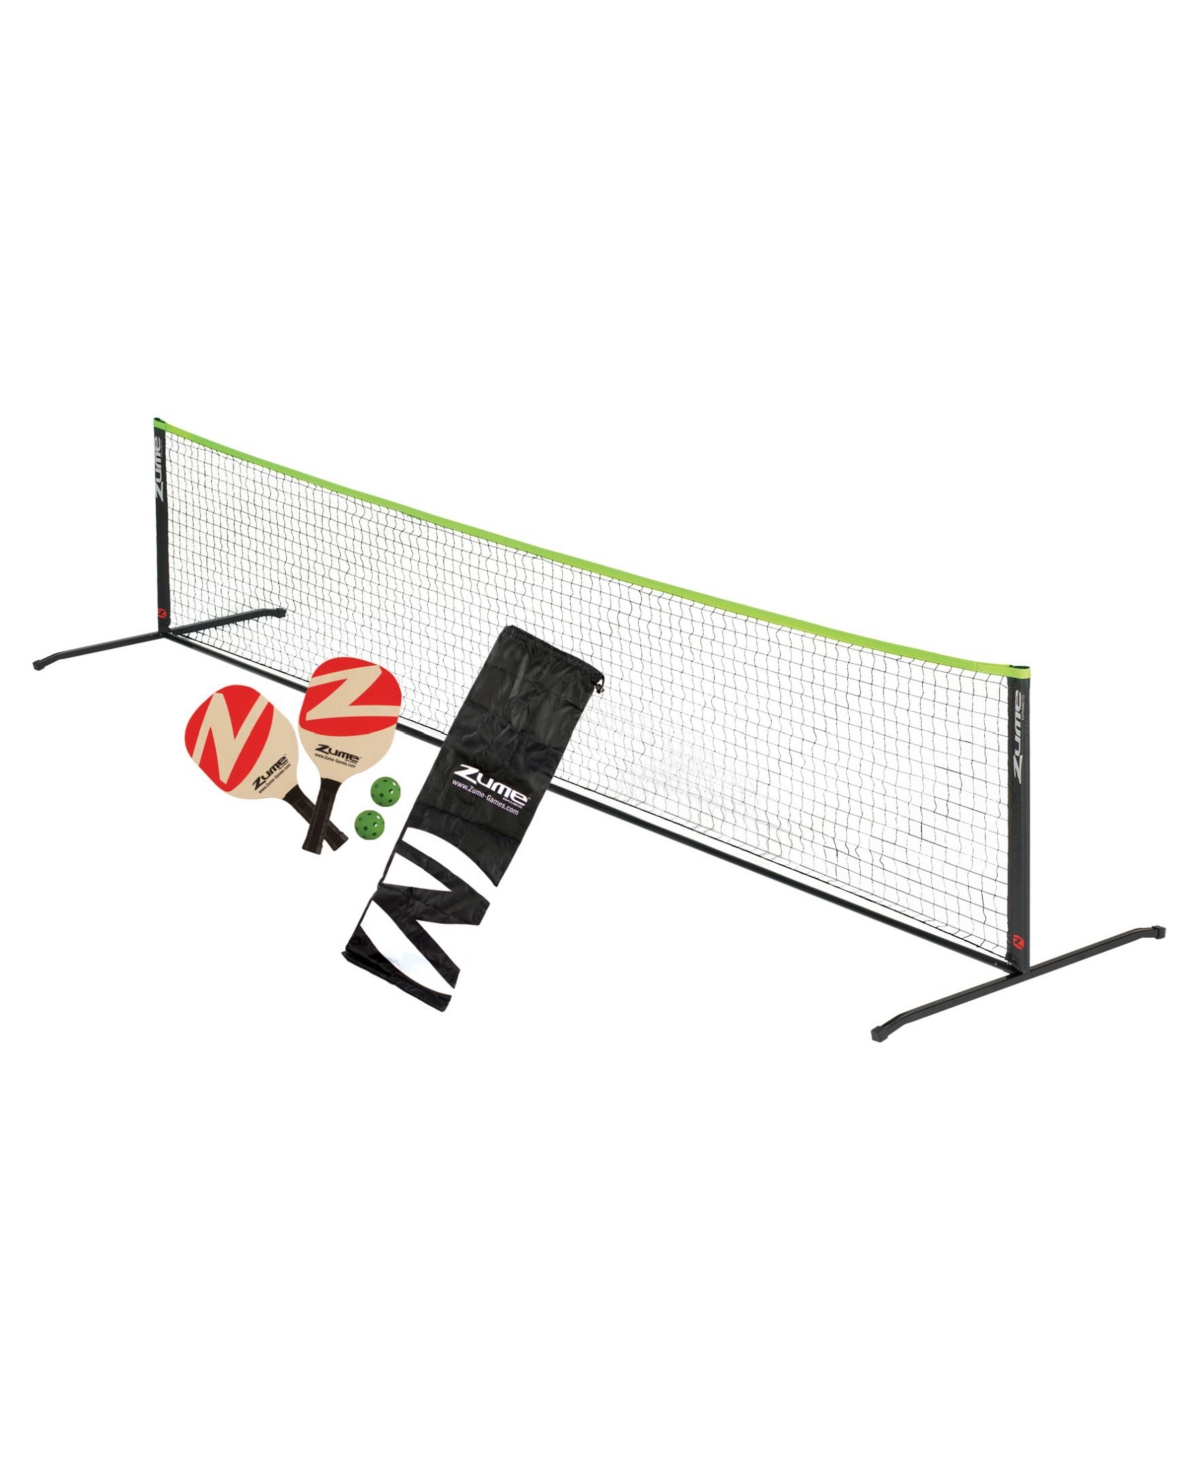 Viva Sol Kids' Zume Games Portable Instant Play Portable Pickleball Set Includes Paddles, Balls And Net In Multi